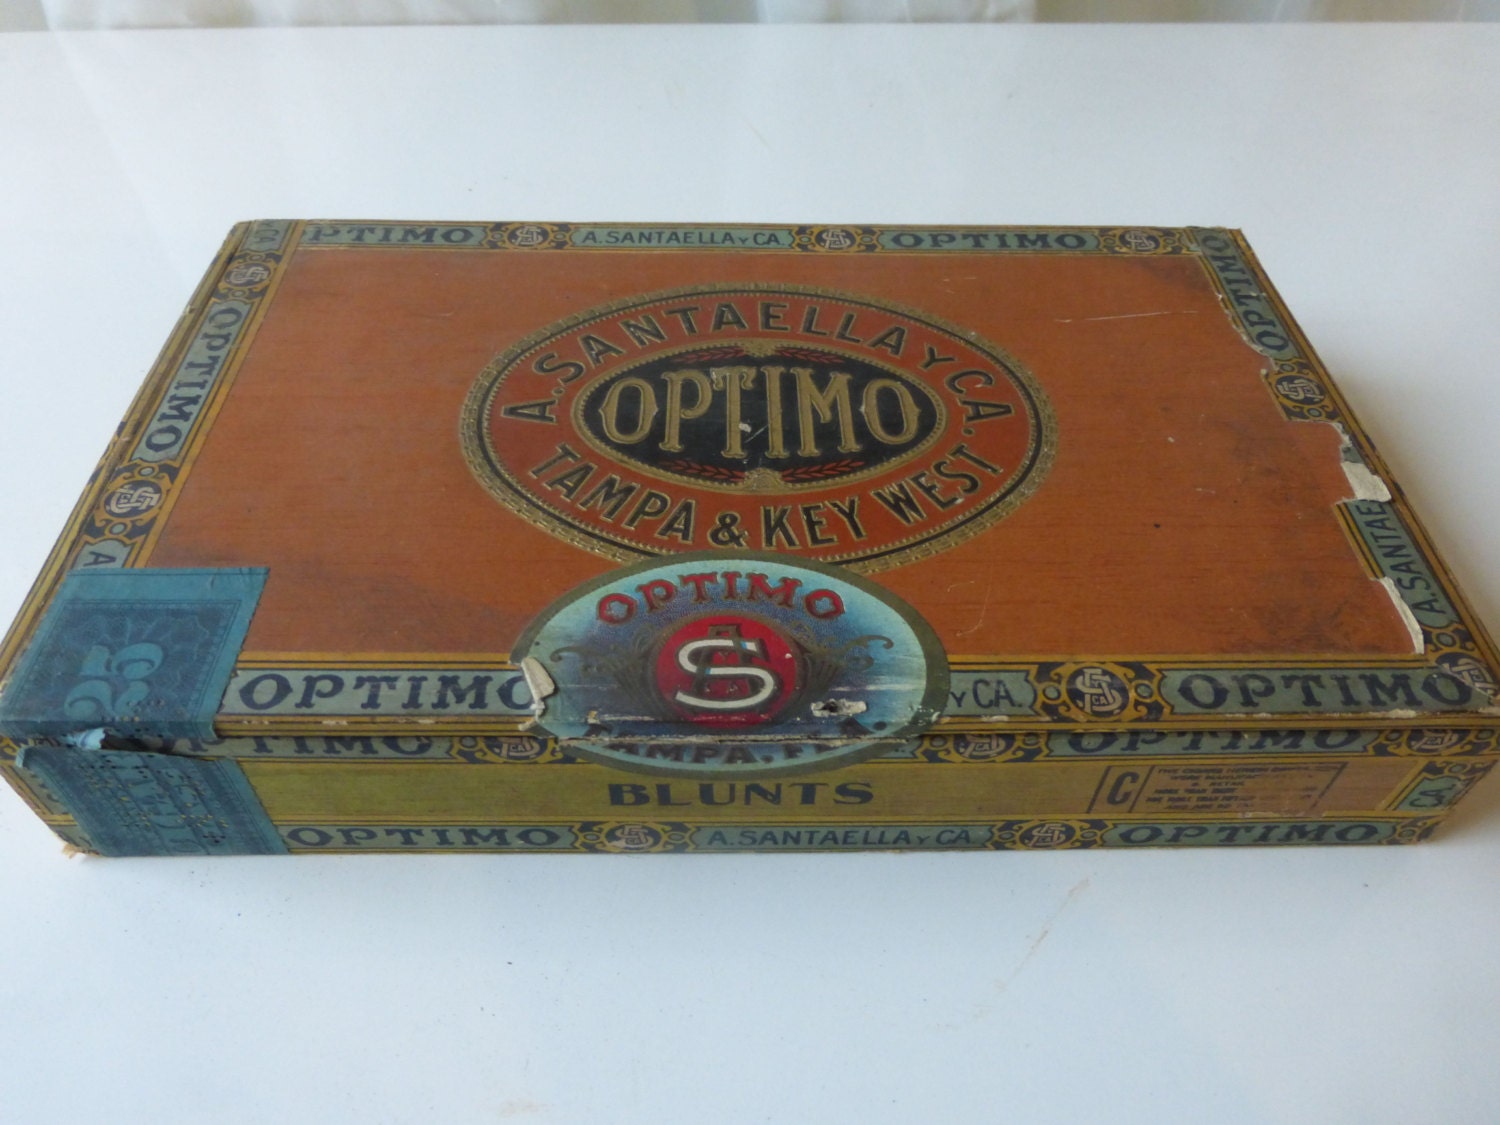 Vintage Optimo Cigar Box from the late 1800's. Has all the